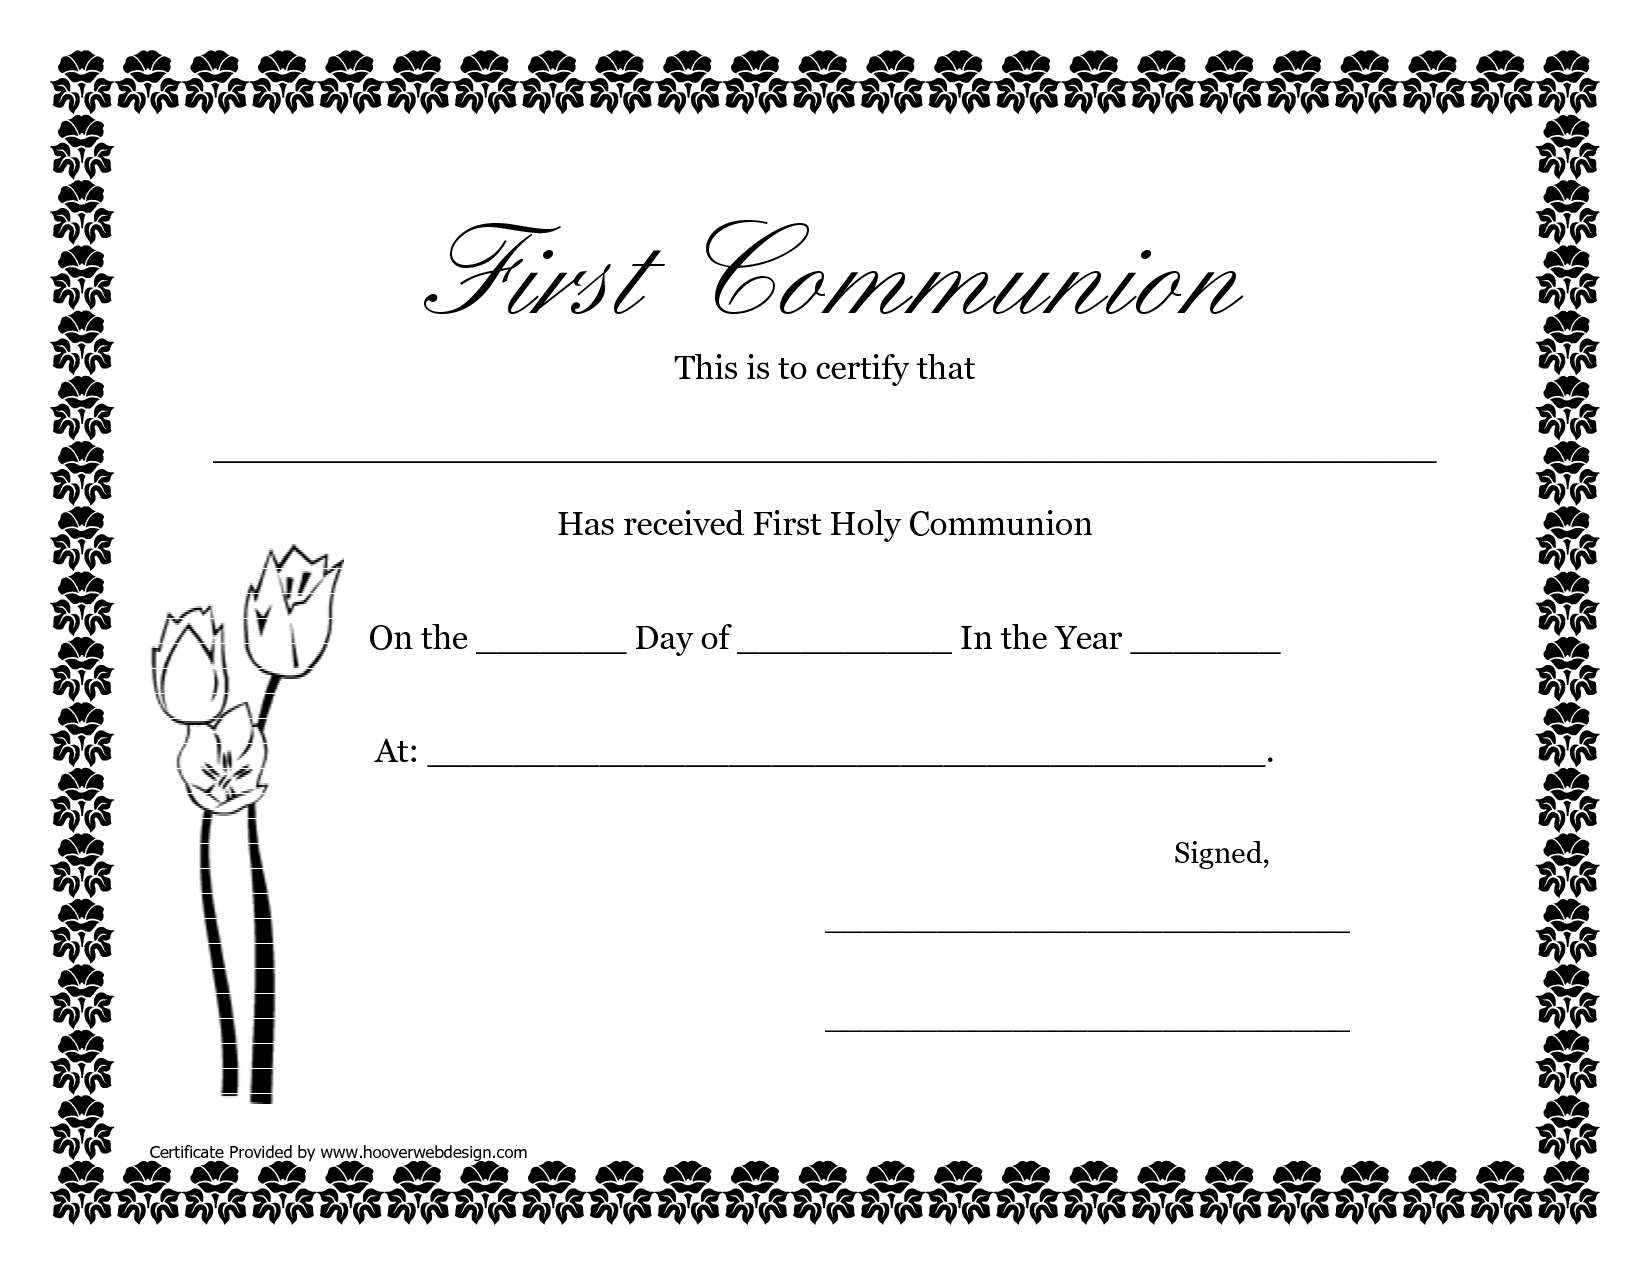 First Communion Banner Templates | Printable First Communion Regarding First Holy Communion Banner Templates